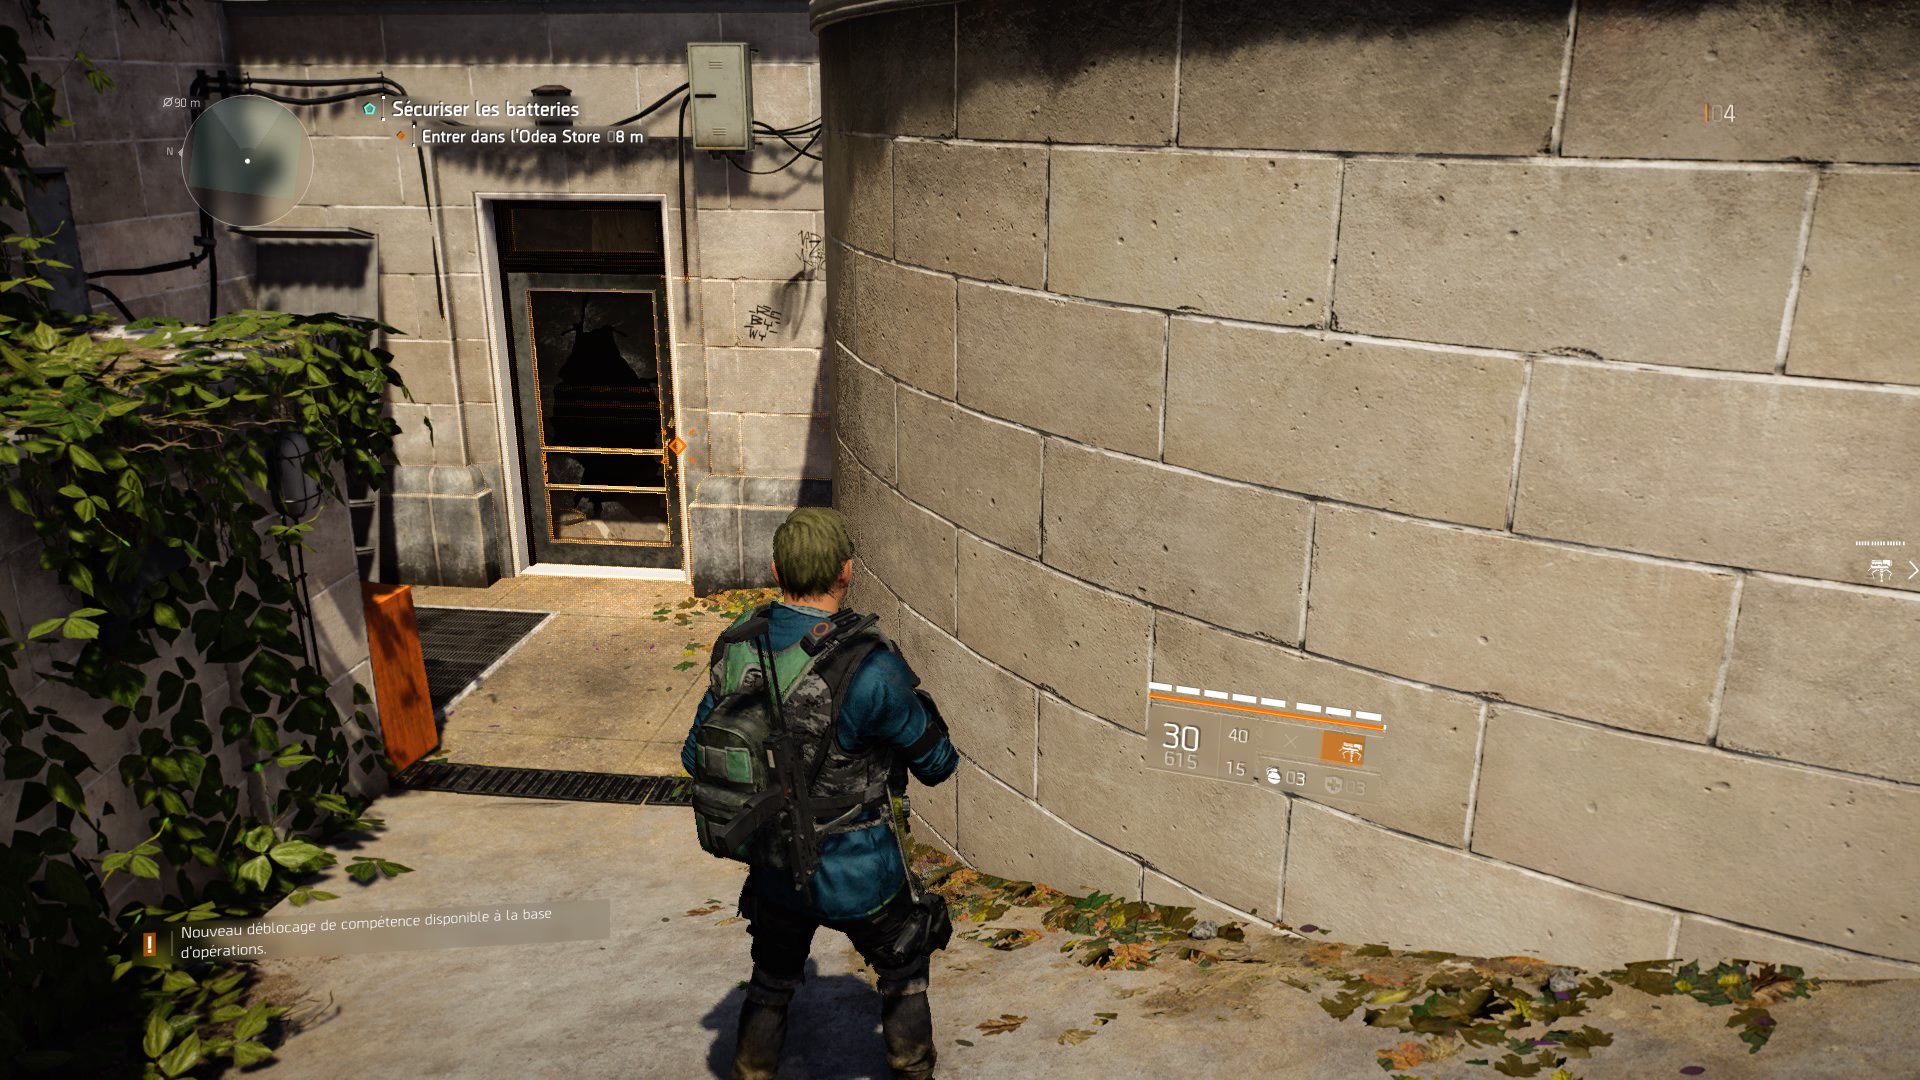 The division 2 magasin odea